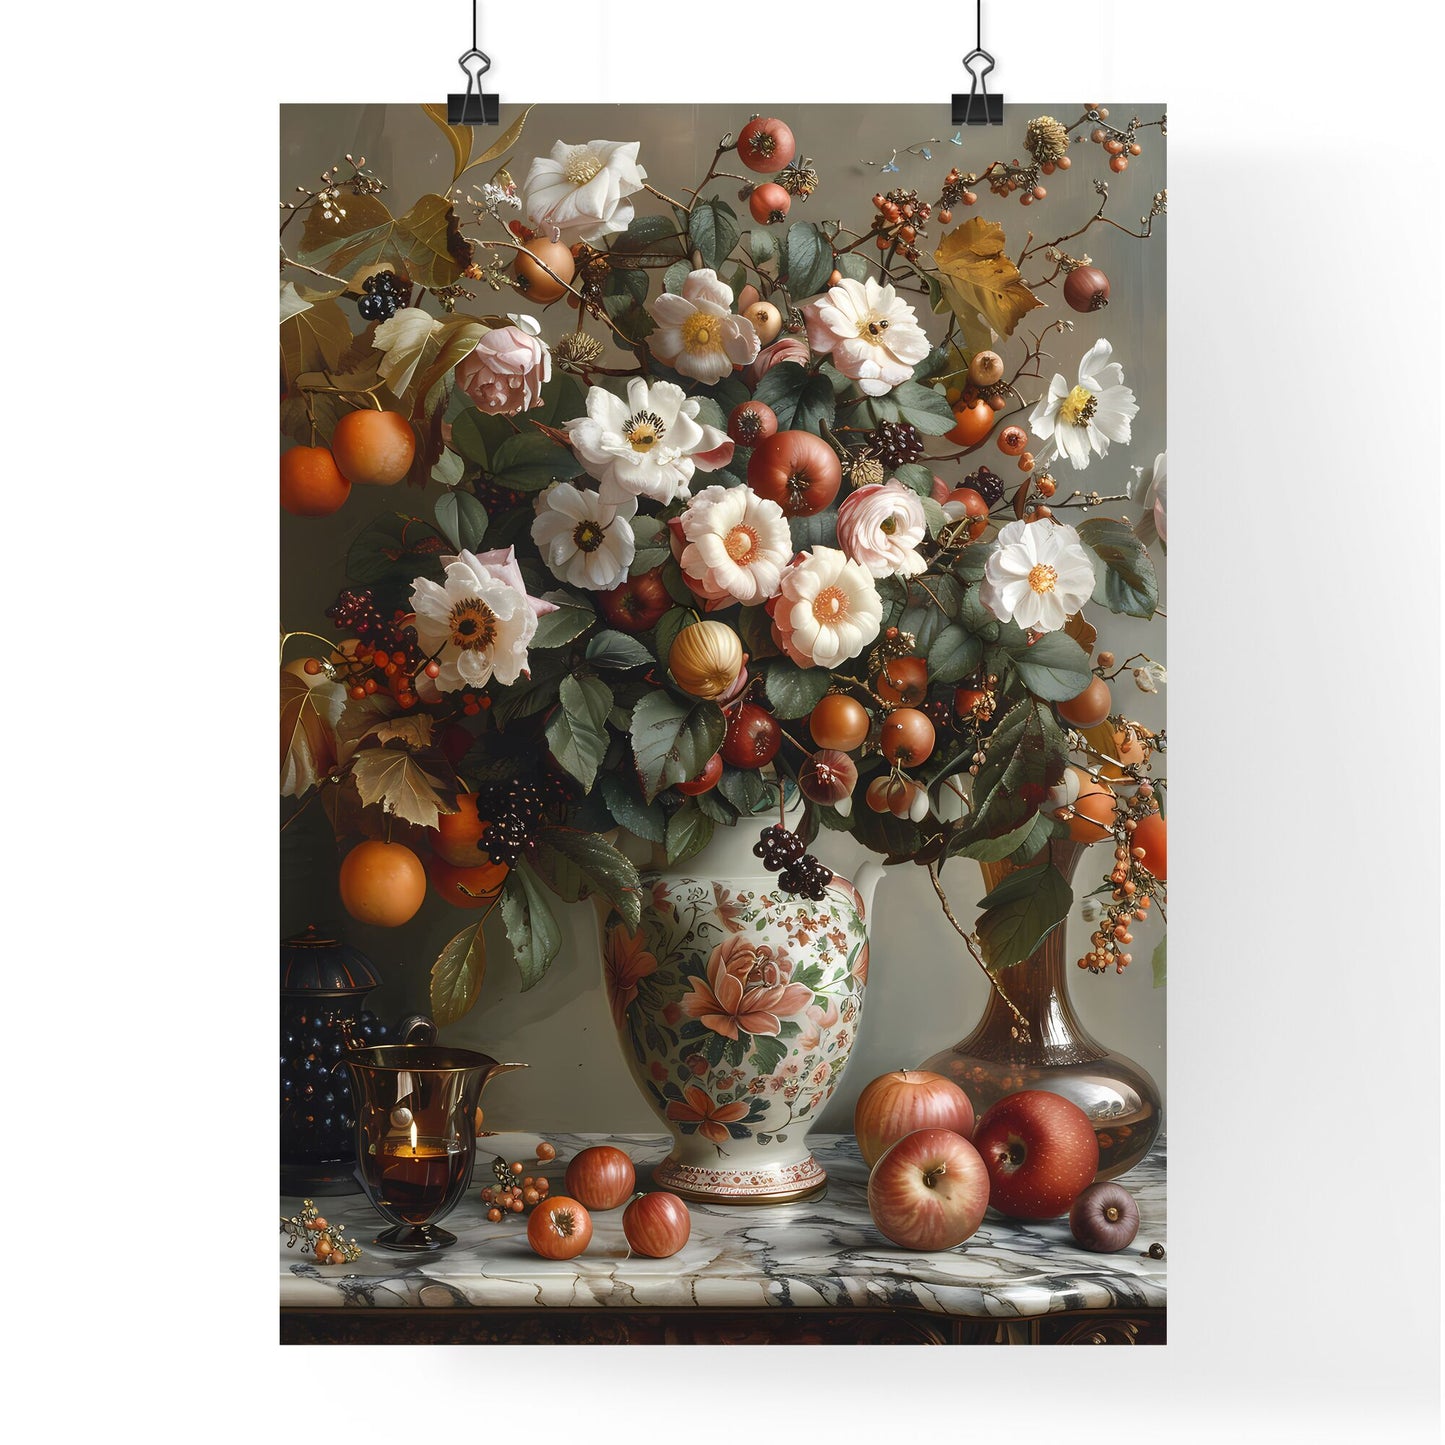 Rustic Floral Tableau: Vibrant Bouquet in Antique Pitcher on Countryside Table Default Title